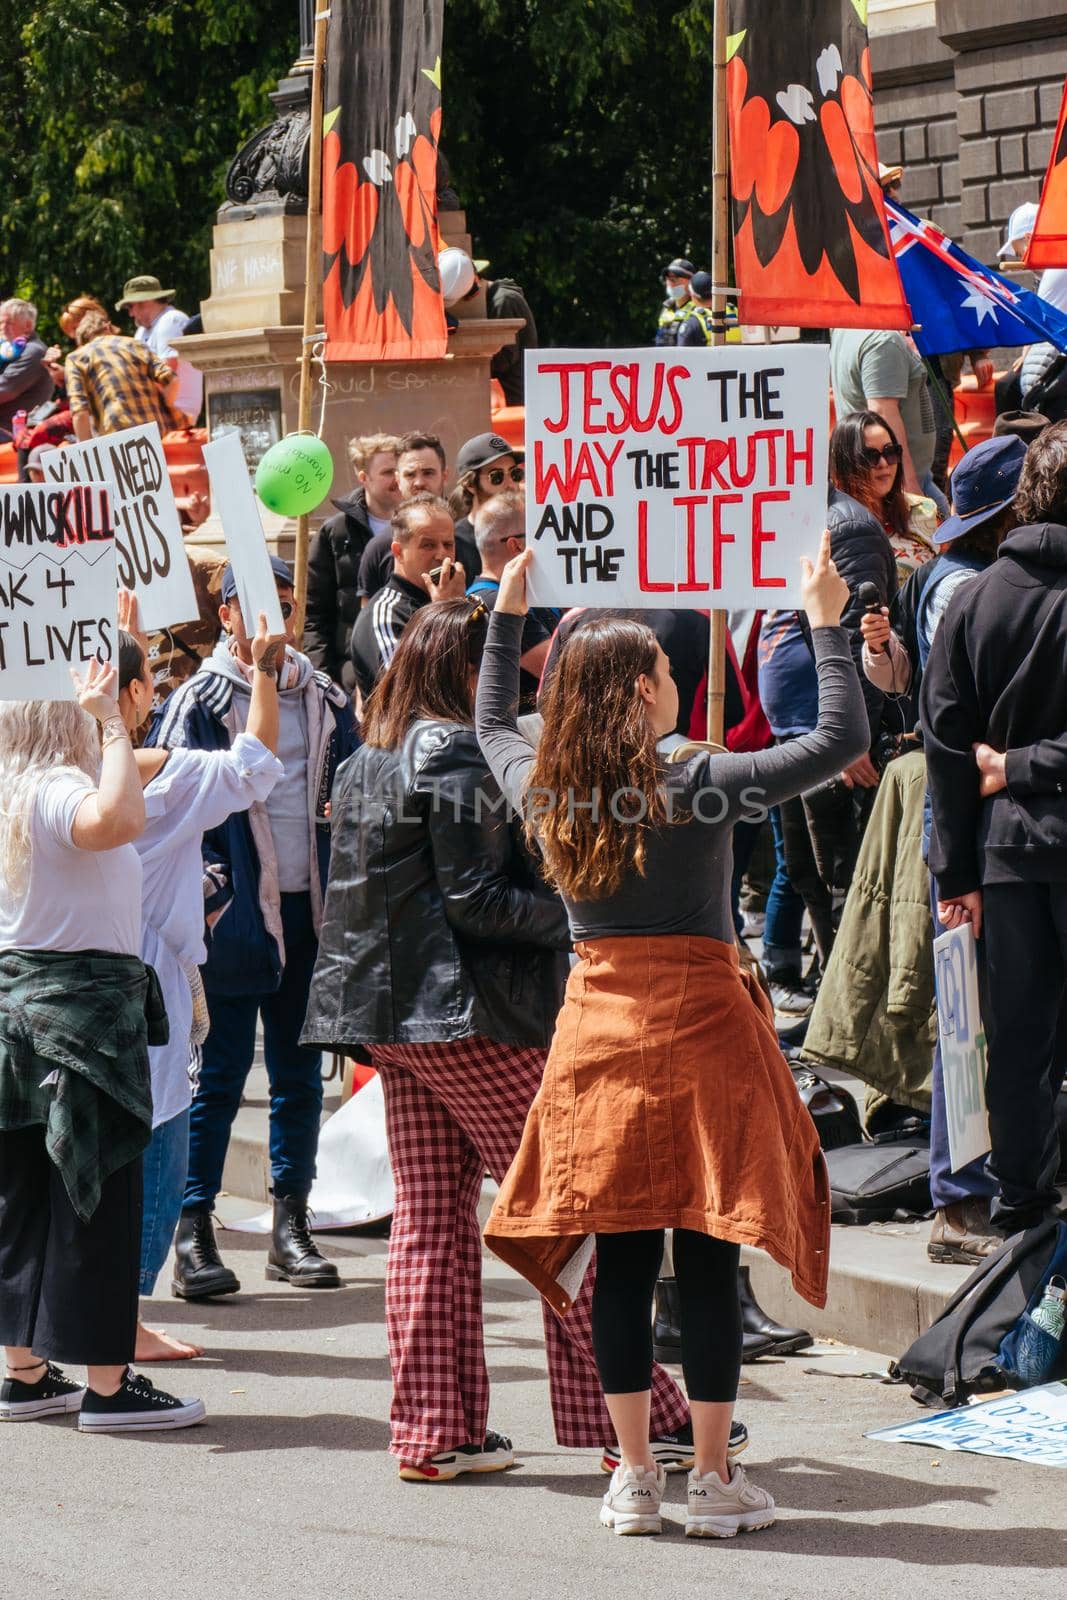 Australians Protest As Part Of "World Wide Rally For Freedom" Against Mandatory COVID-19 Vaccines by FiledIMAGE